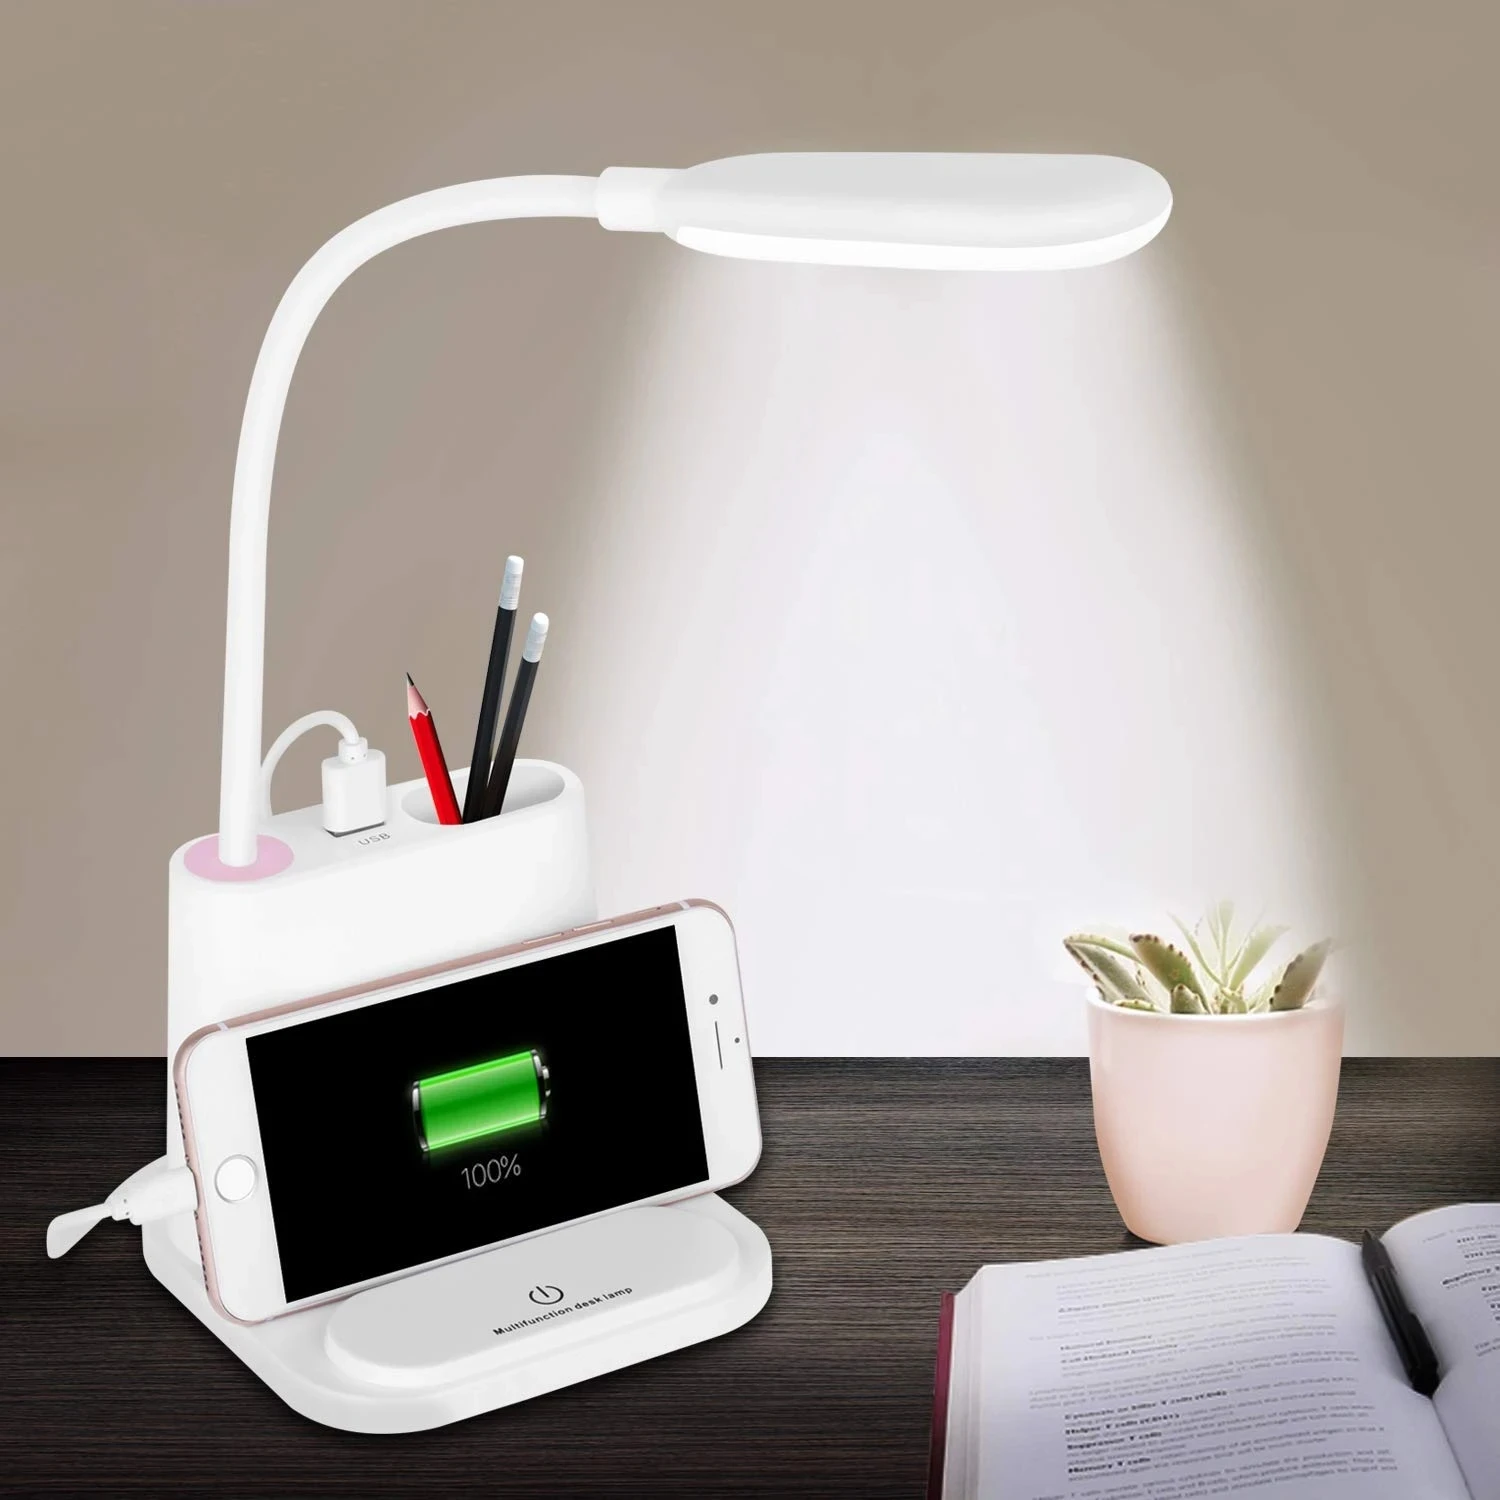 LED Desk Lamp,Rechargeable Lamp with USB Charging Port & Pen Holder, 2 Color Modes, Eye Protection for College Dorm Reading dc led with charging protection touch dimming lamp control panel 5v diy repair general desk lamp circuit for 3v single lamp bead